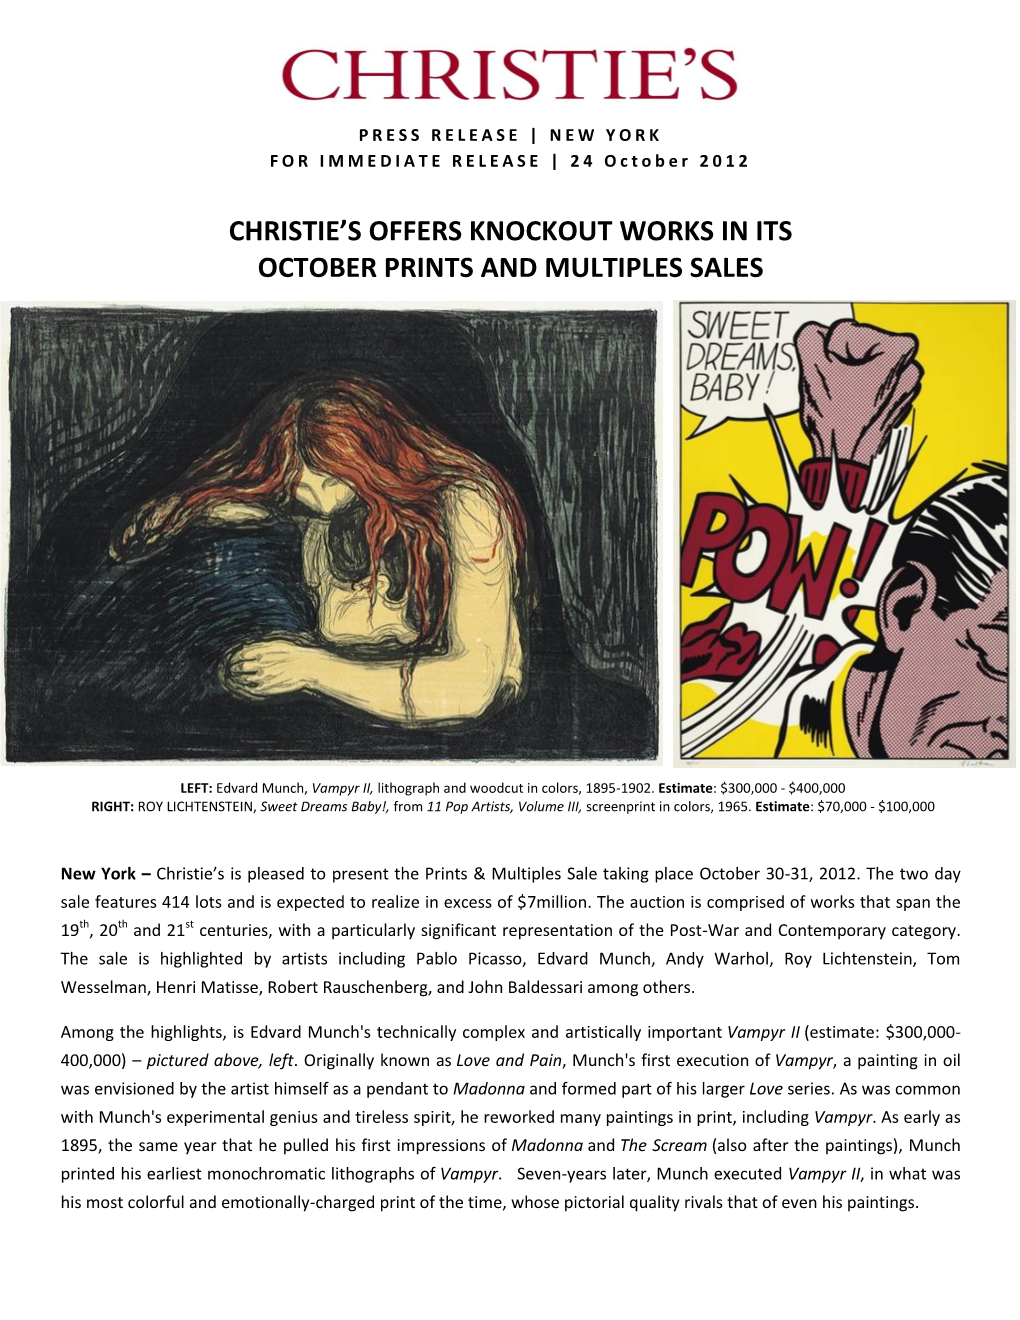 Christie's Offers Knockout Works in Its October Prints